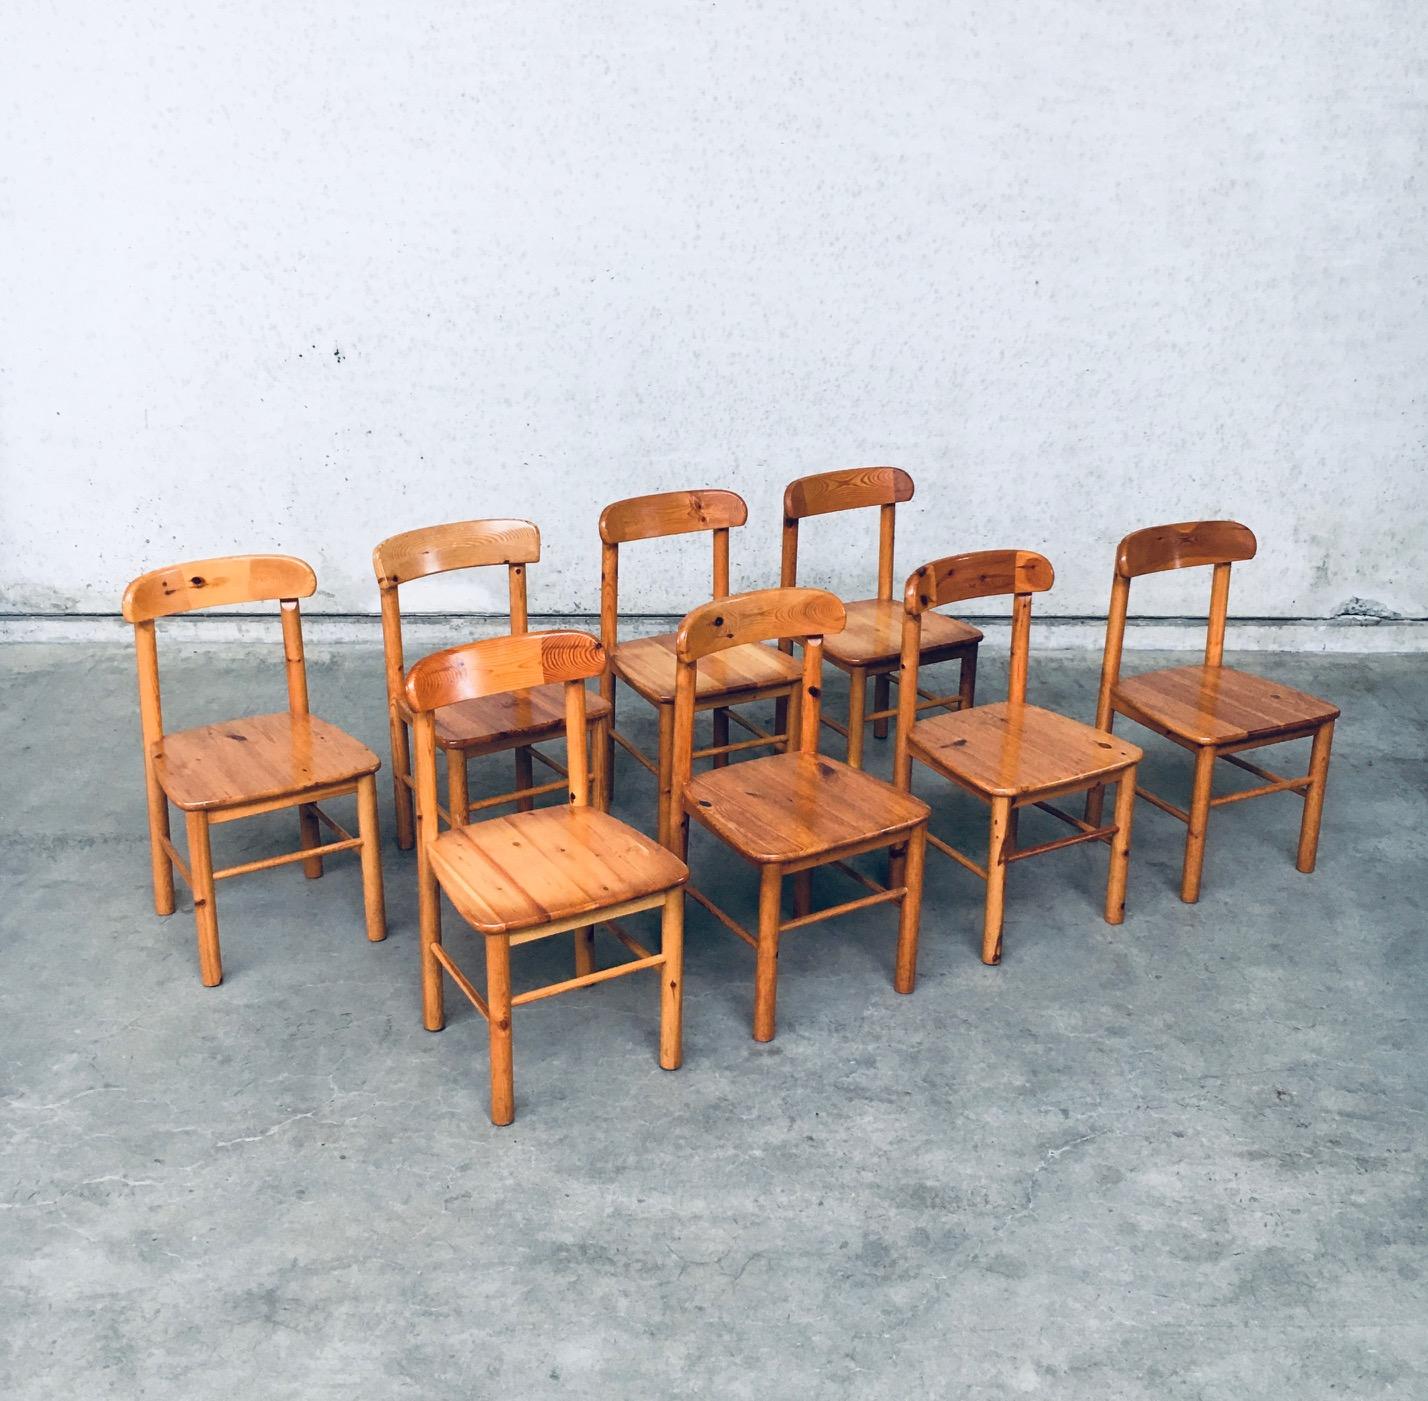 Vintage Scandinavian Design set of 8 Dining Chairs by Rainer Daumiller for Hirtshals Savvaerk. Made in Sweden, 1970's period. Solid pine constructed dining chair set with nice bent backrest. These chairs all are in very good condition. Some have